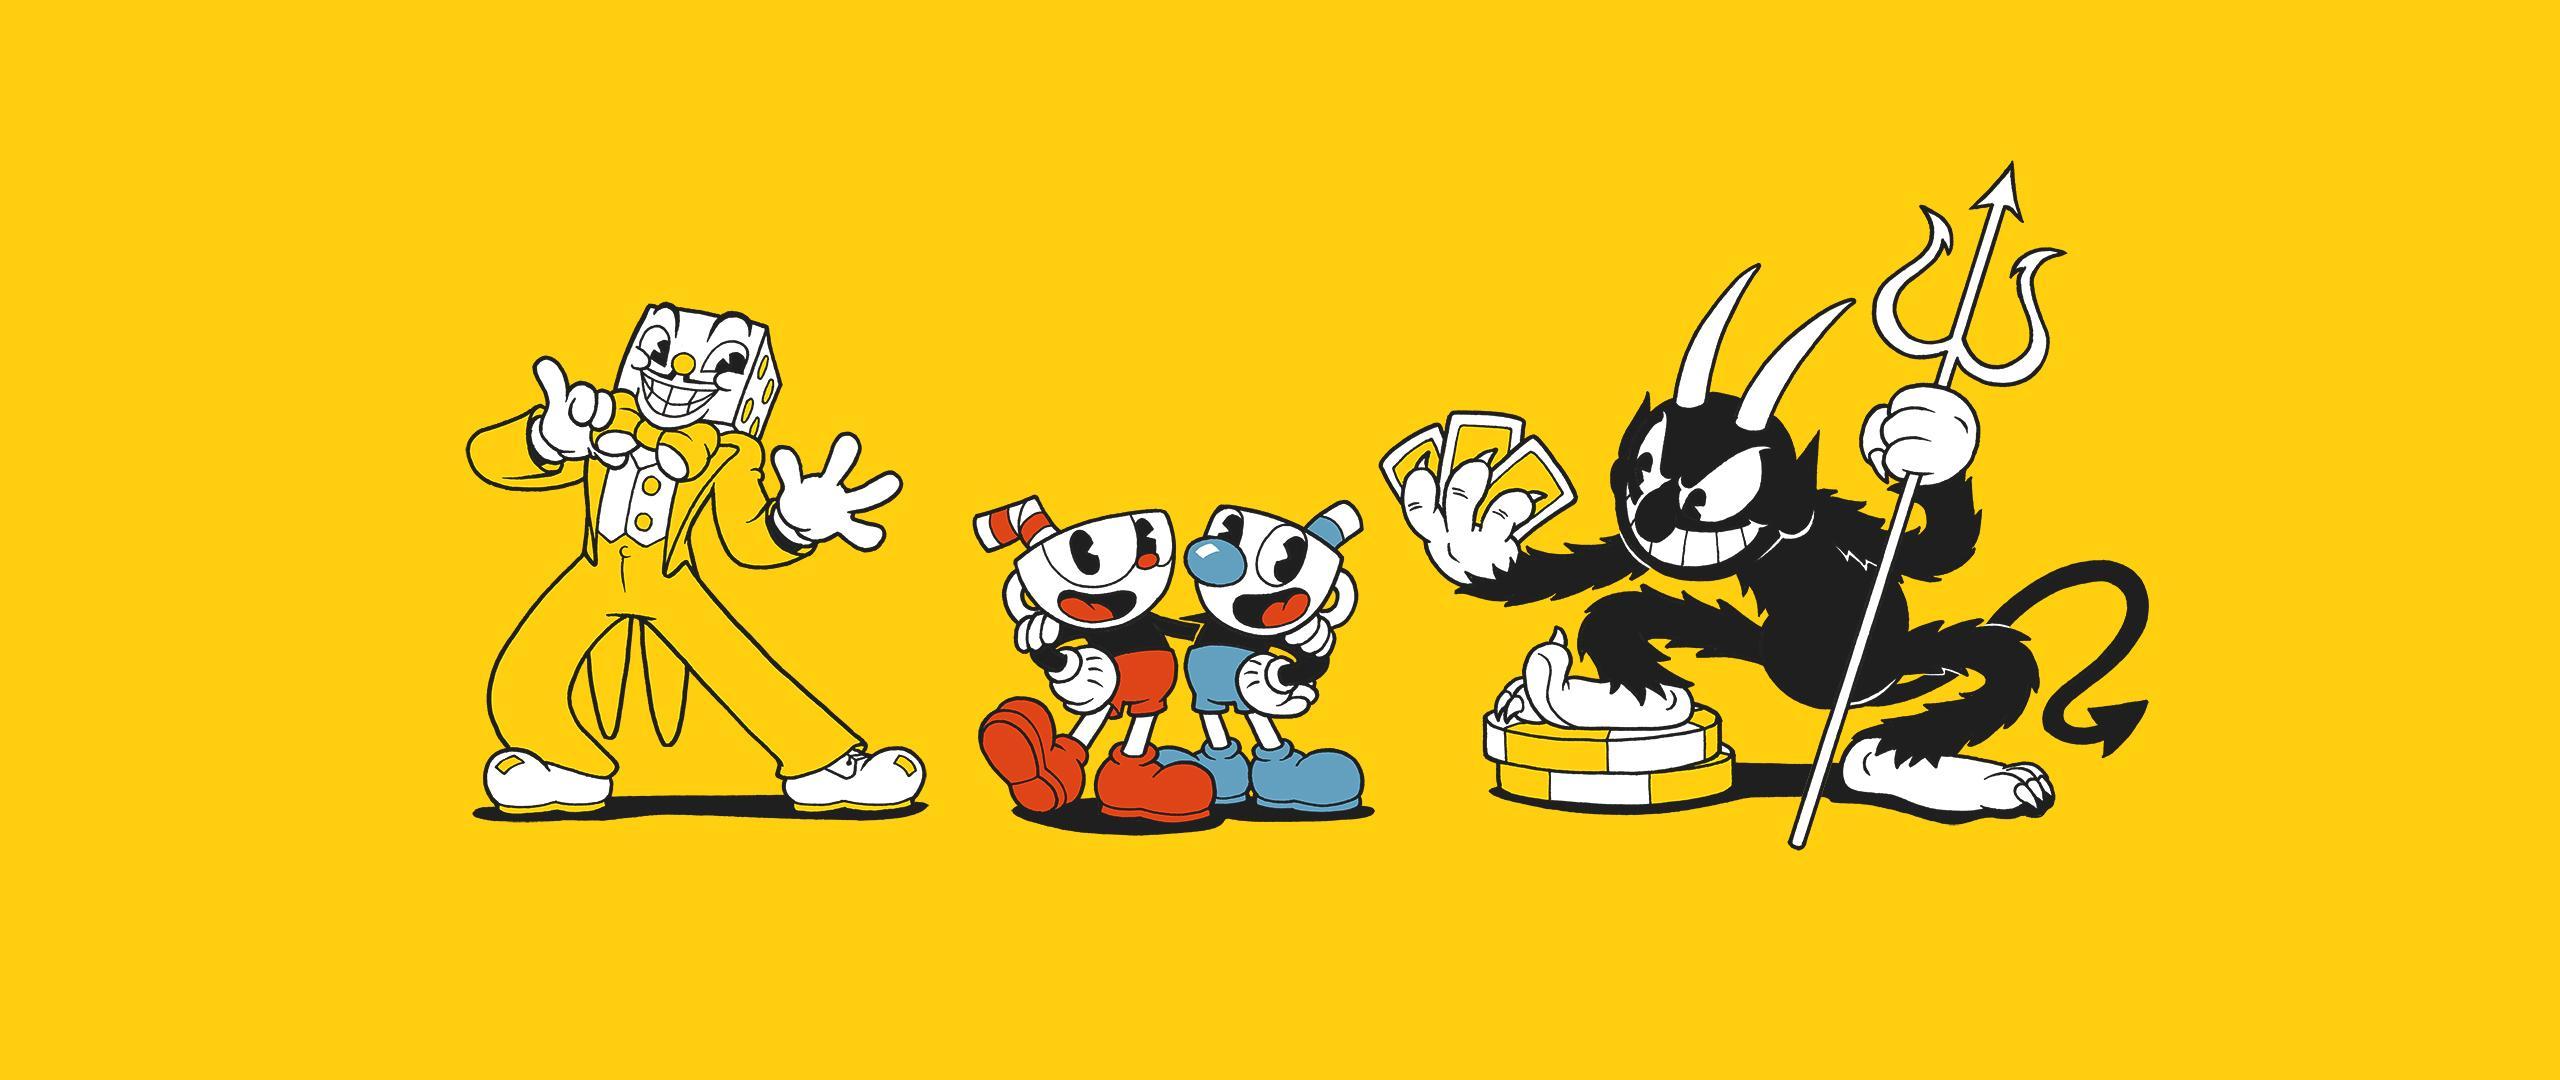 Cuphead Wallpaper For Chromebook | Chromebook Wallpapers